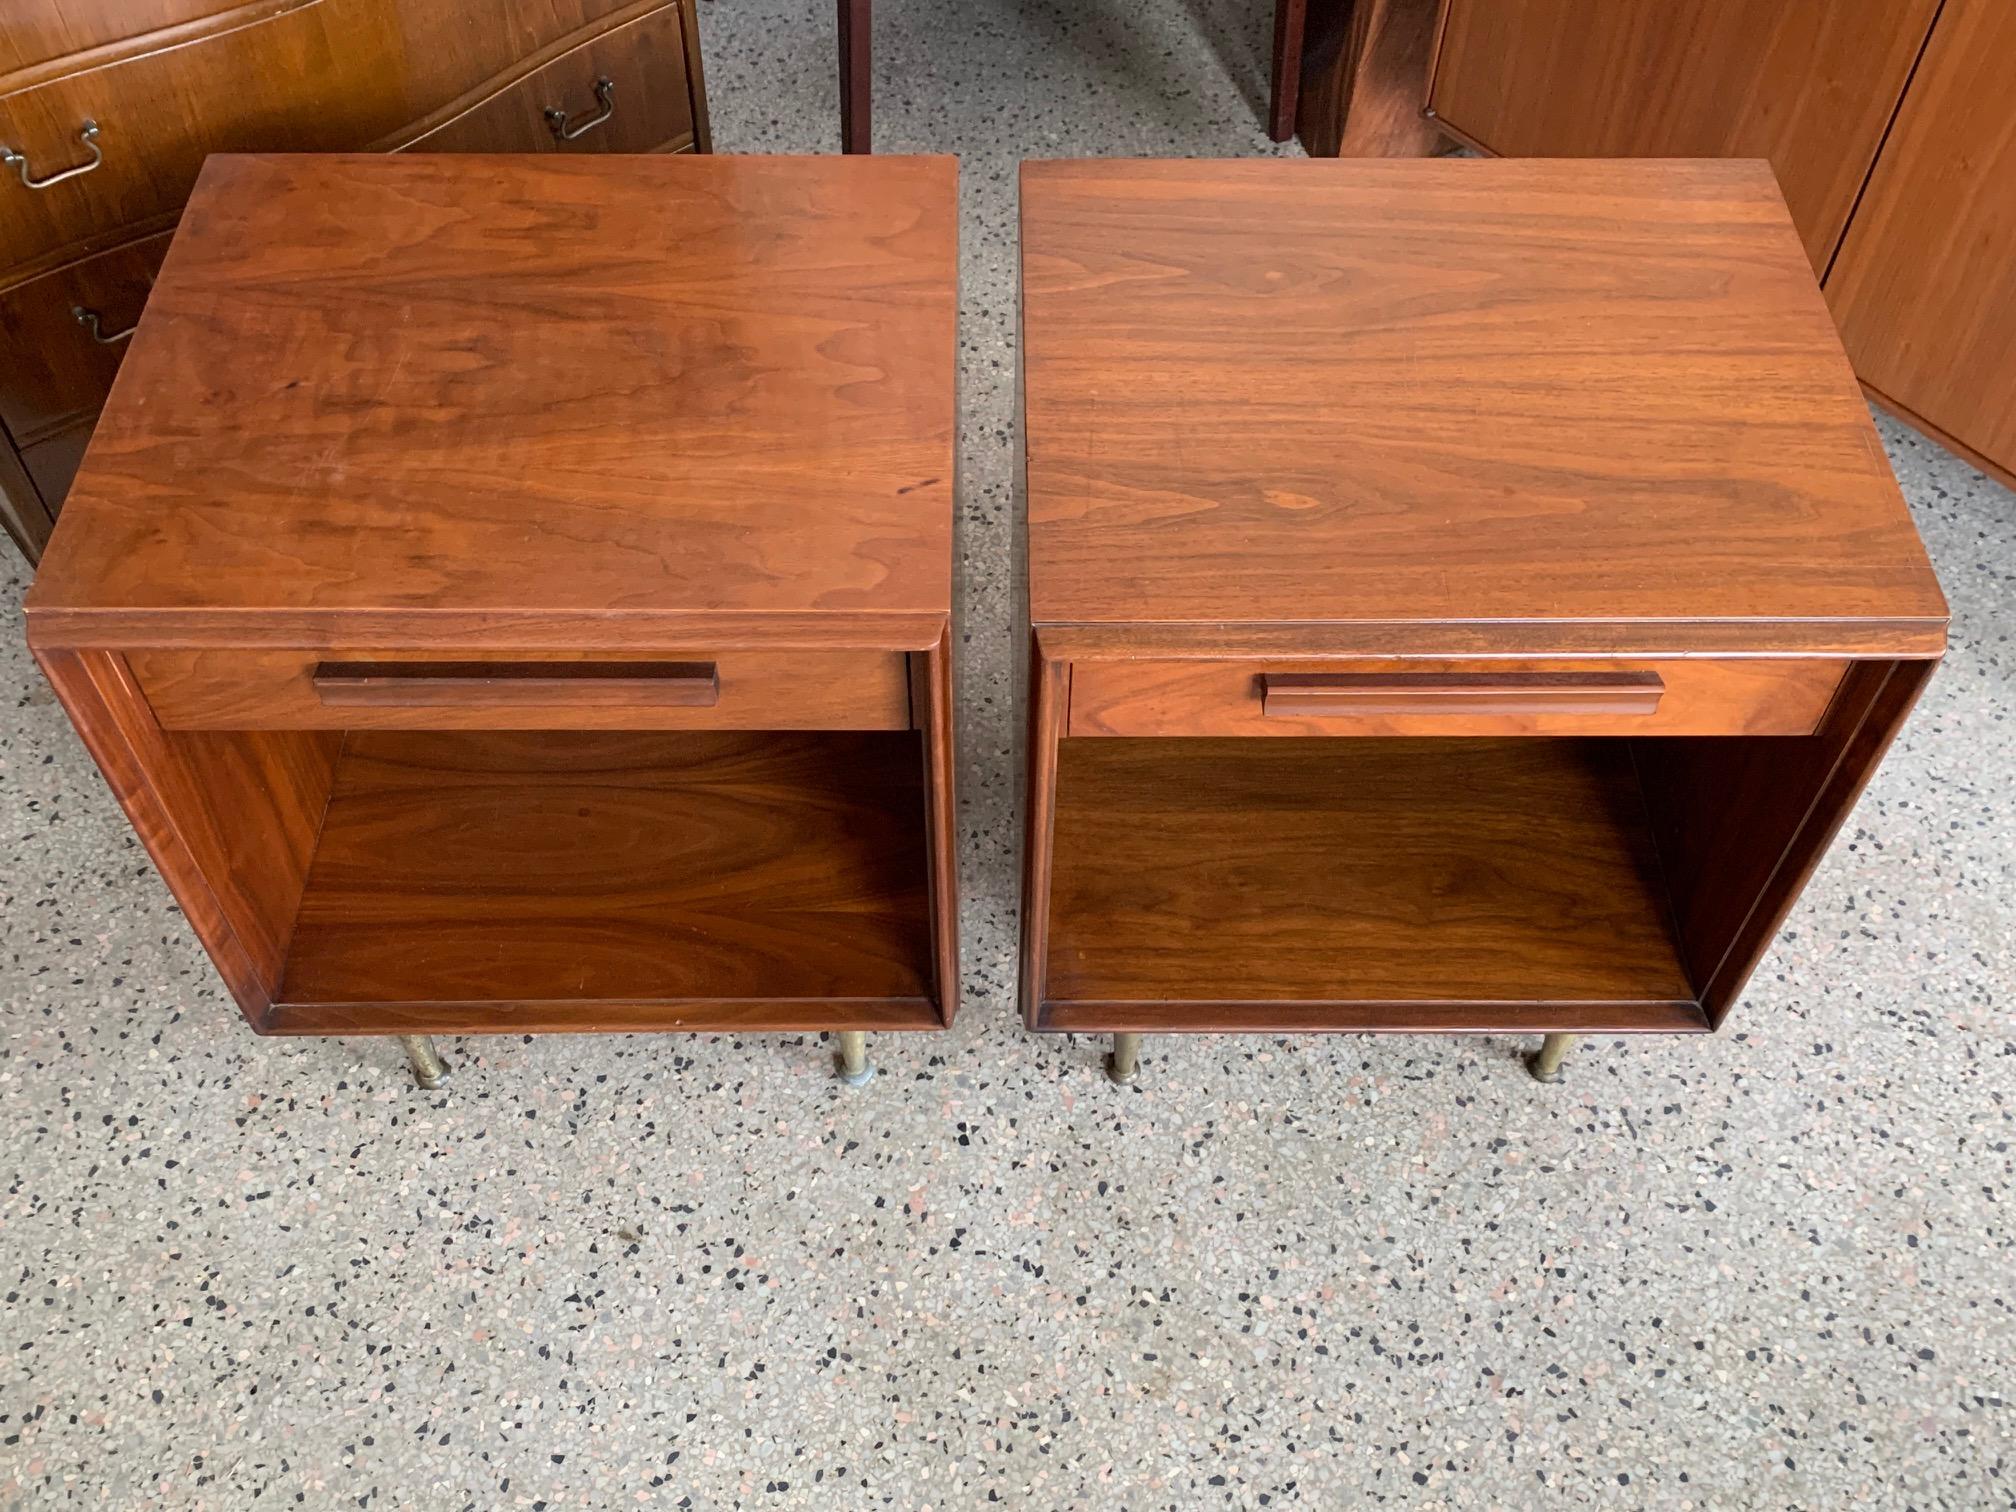 A pair of Classic Widdicomb night stands, brass legs, walnut. Single drawer and open space underneath.